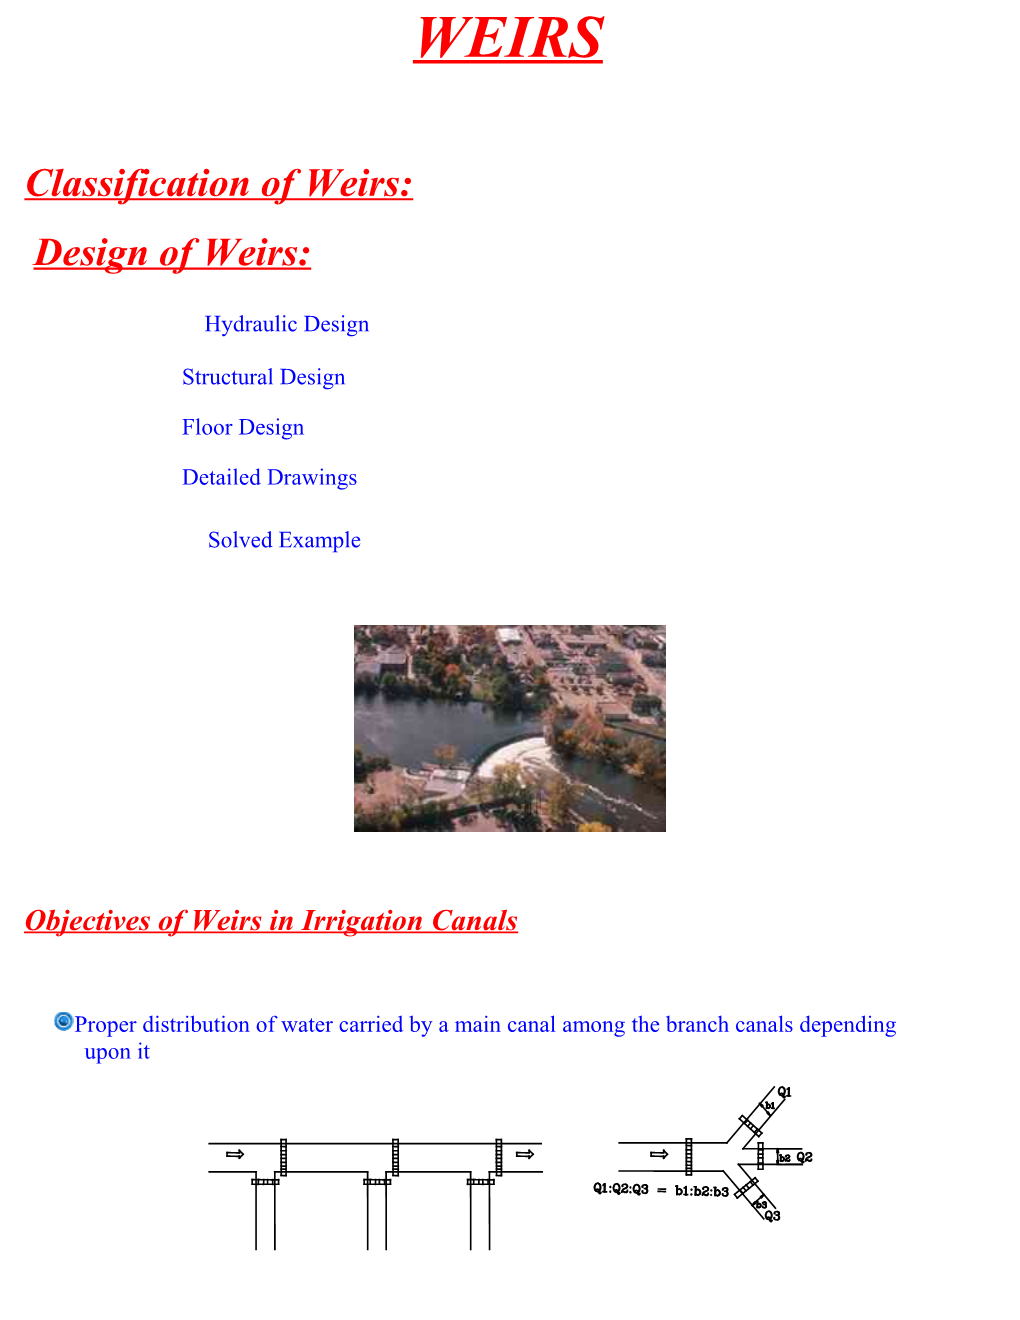 Classification of Weirs